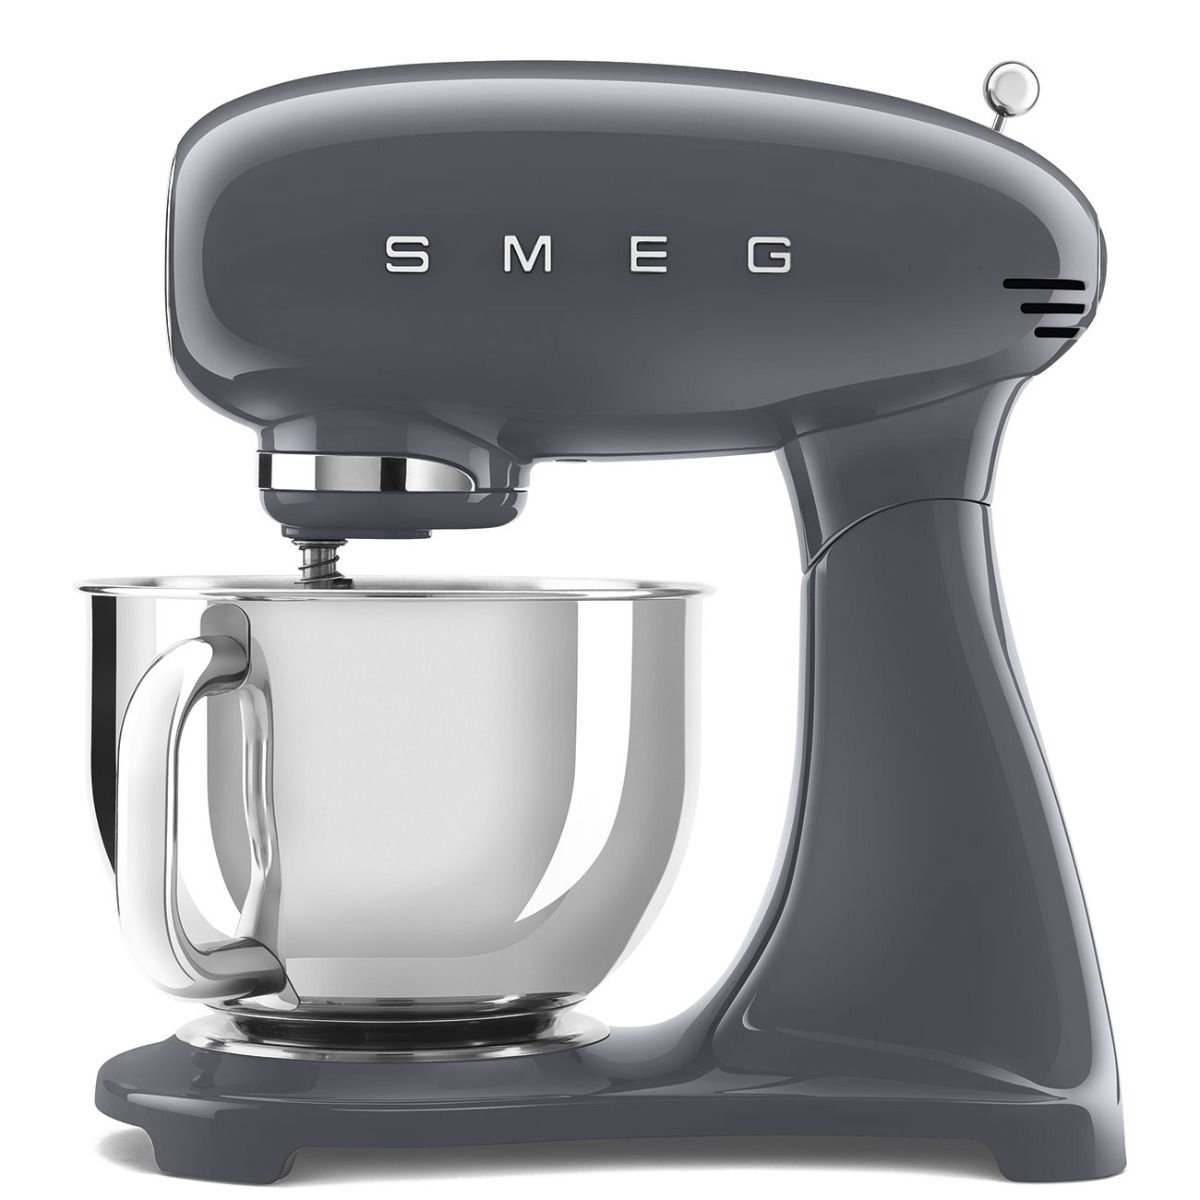 Smeg launch new mini kettle in pastel and classic colours